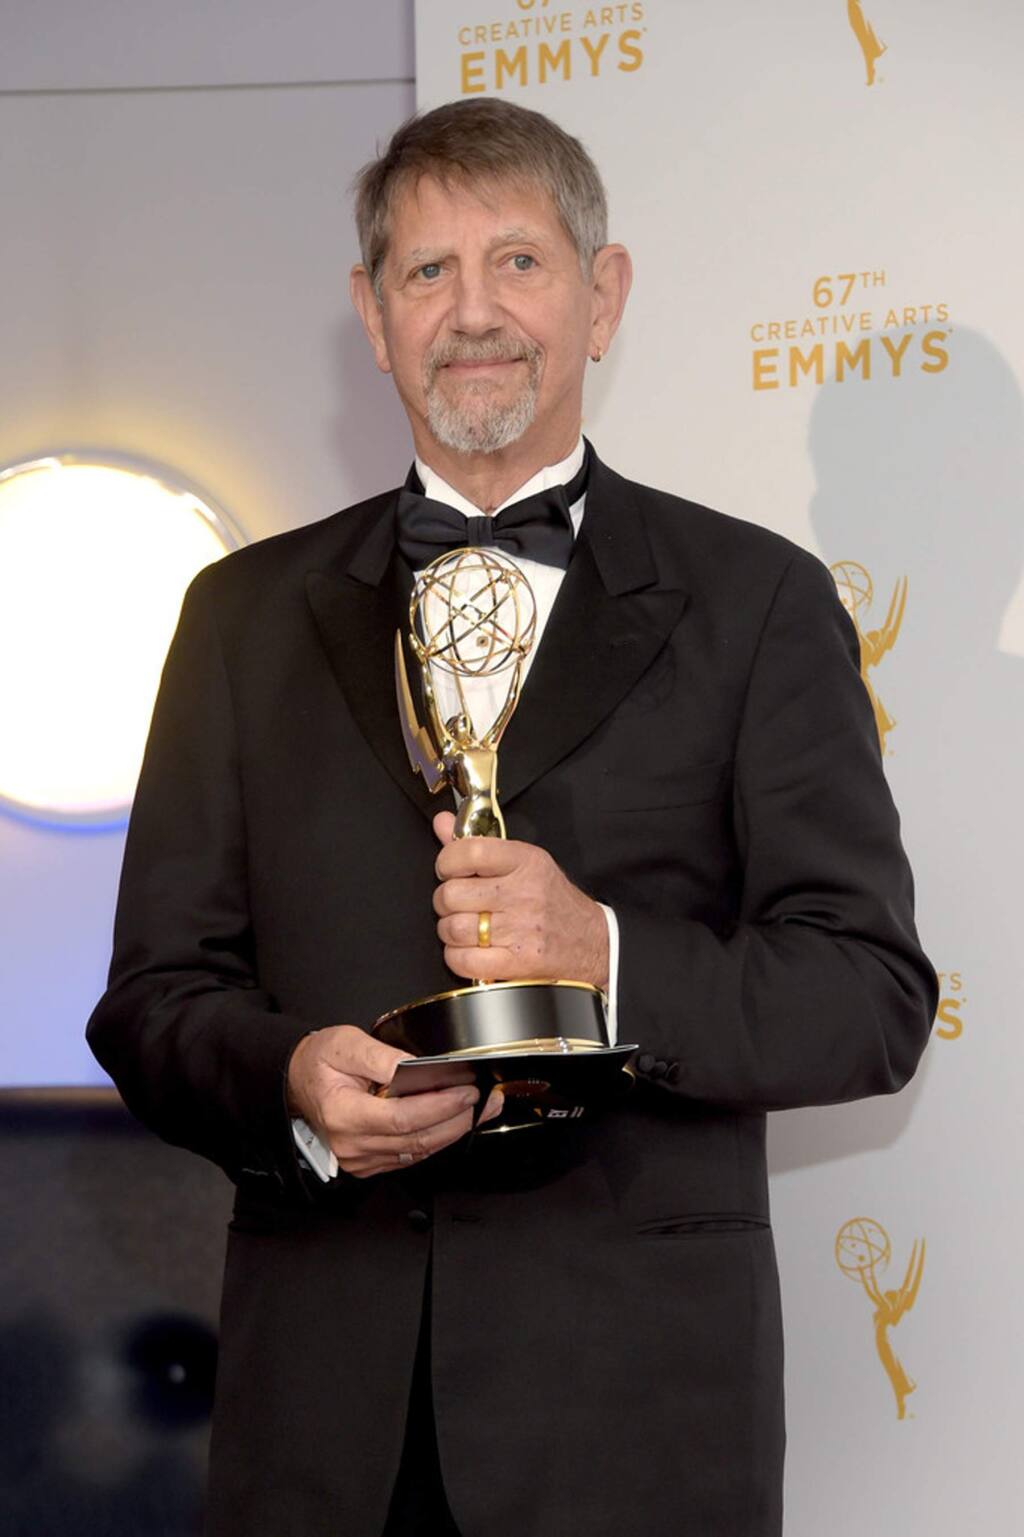 Sonoma County resident Peter Coyote has had an eclectic, award-winning career as an actor, author, director, screenwriter and narrator of films, theater, television and audiobooks. (petercoyote.com)